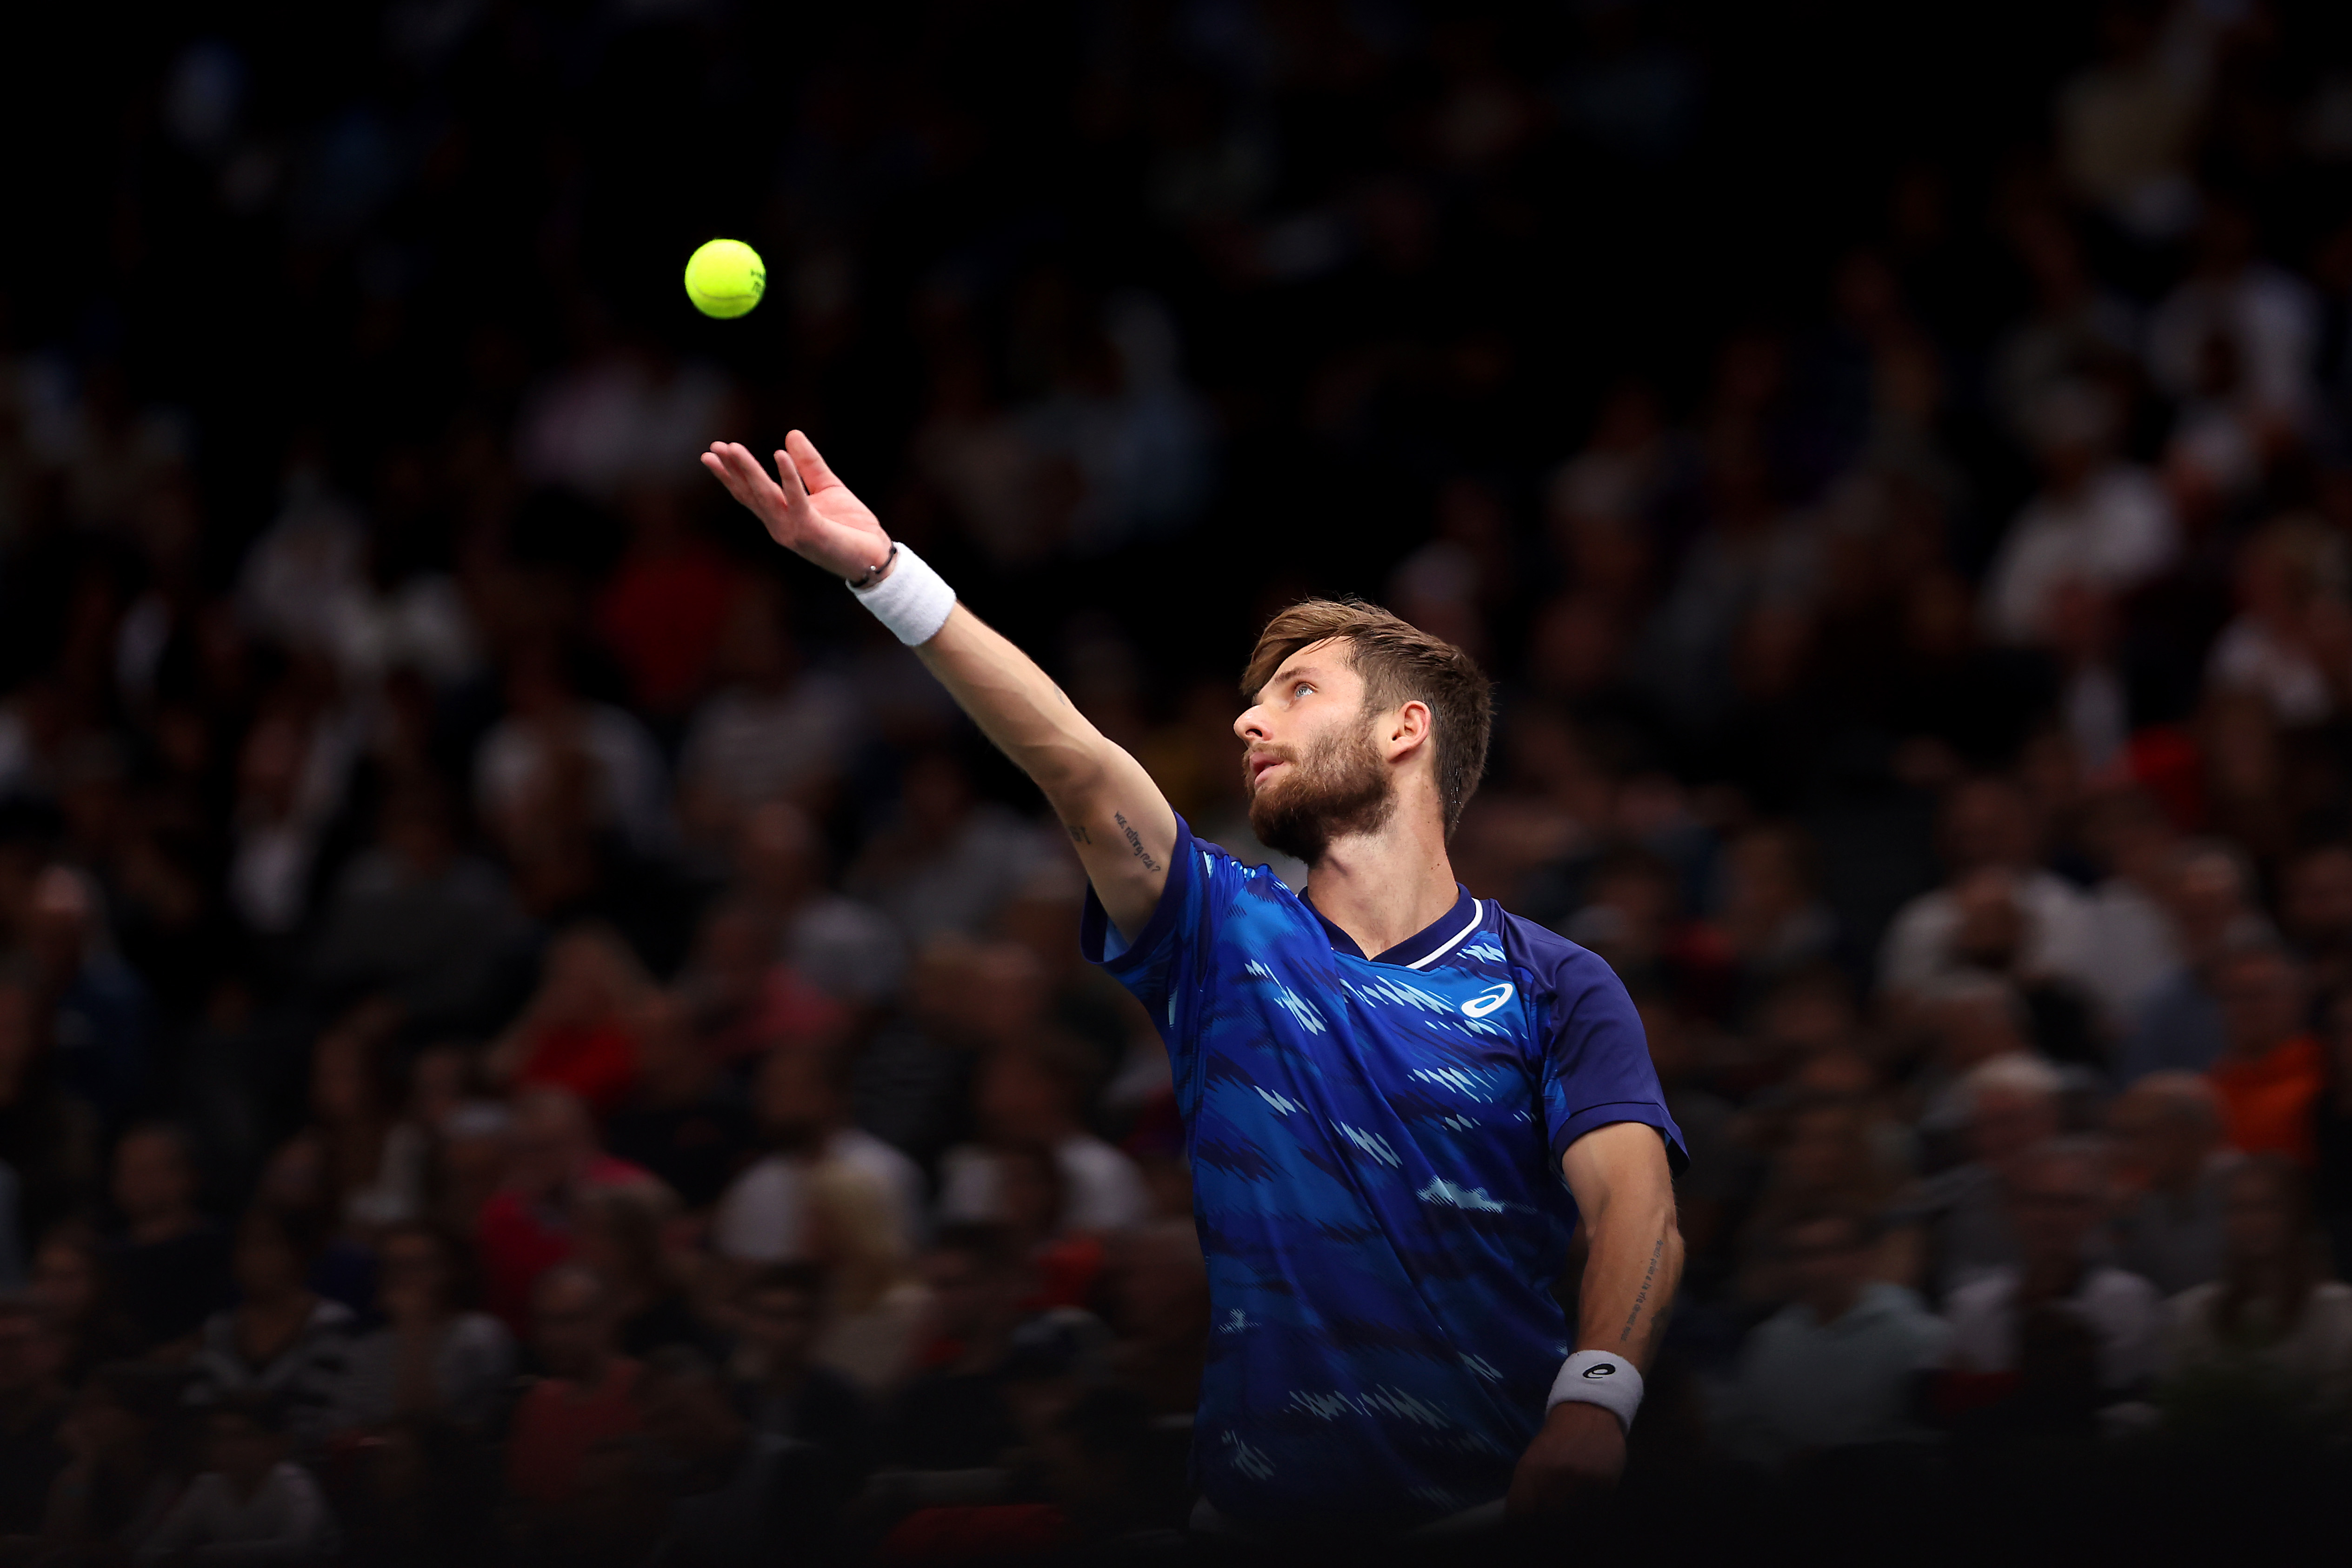 Why dont we have no-ad scoring at the Next Gen ATP Finals—and better yet, in tennis at large?